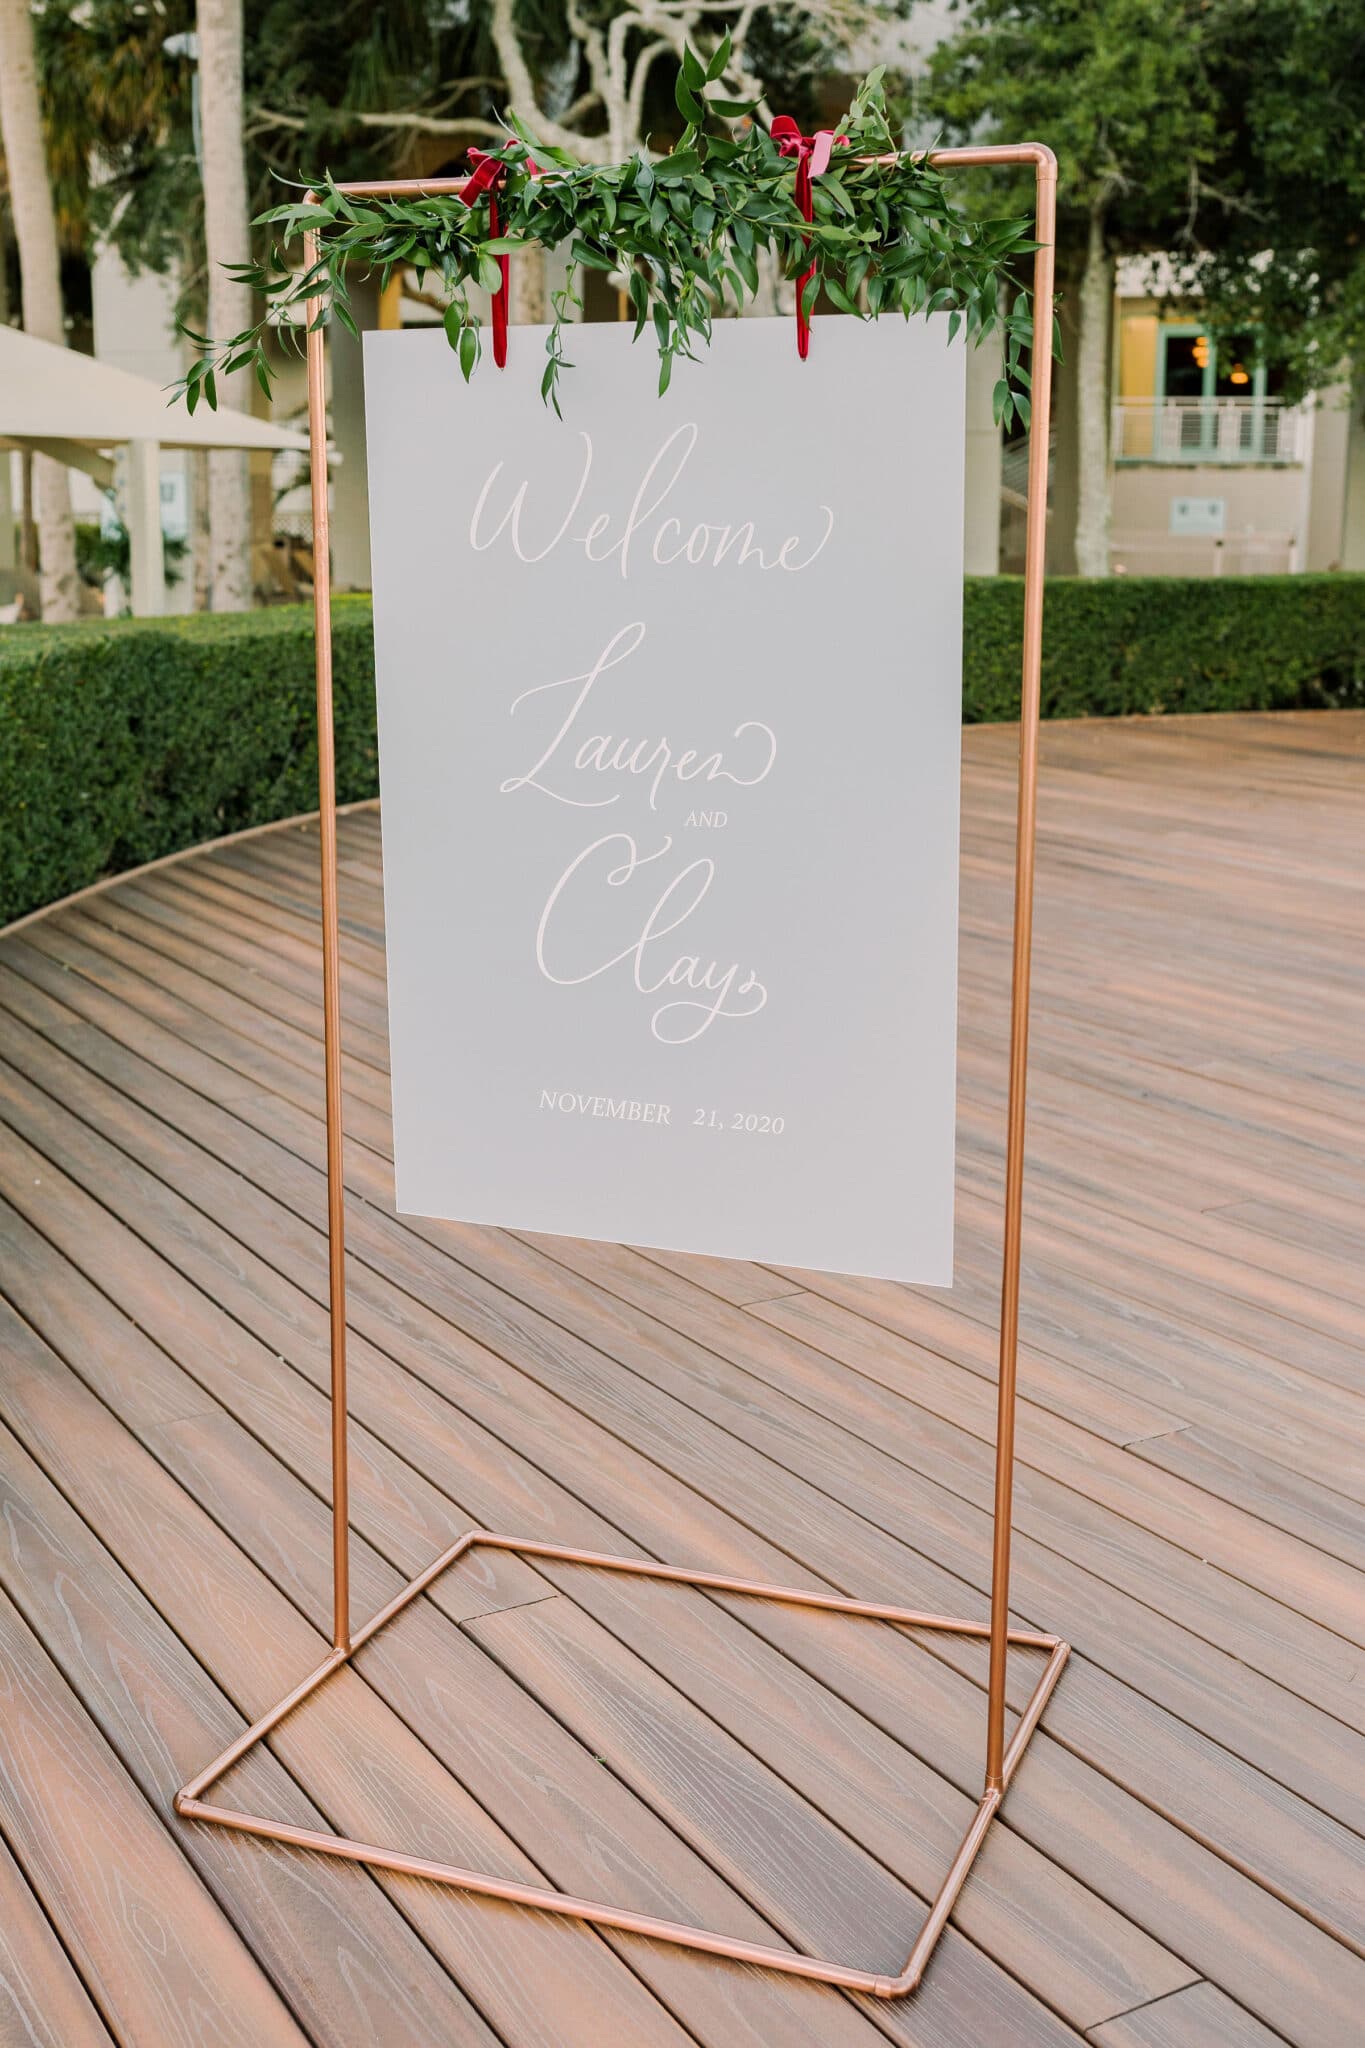 welcome wedding sign by Bare Lettered Designs